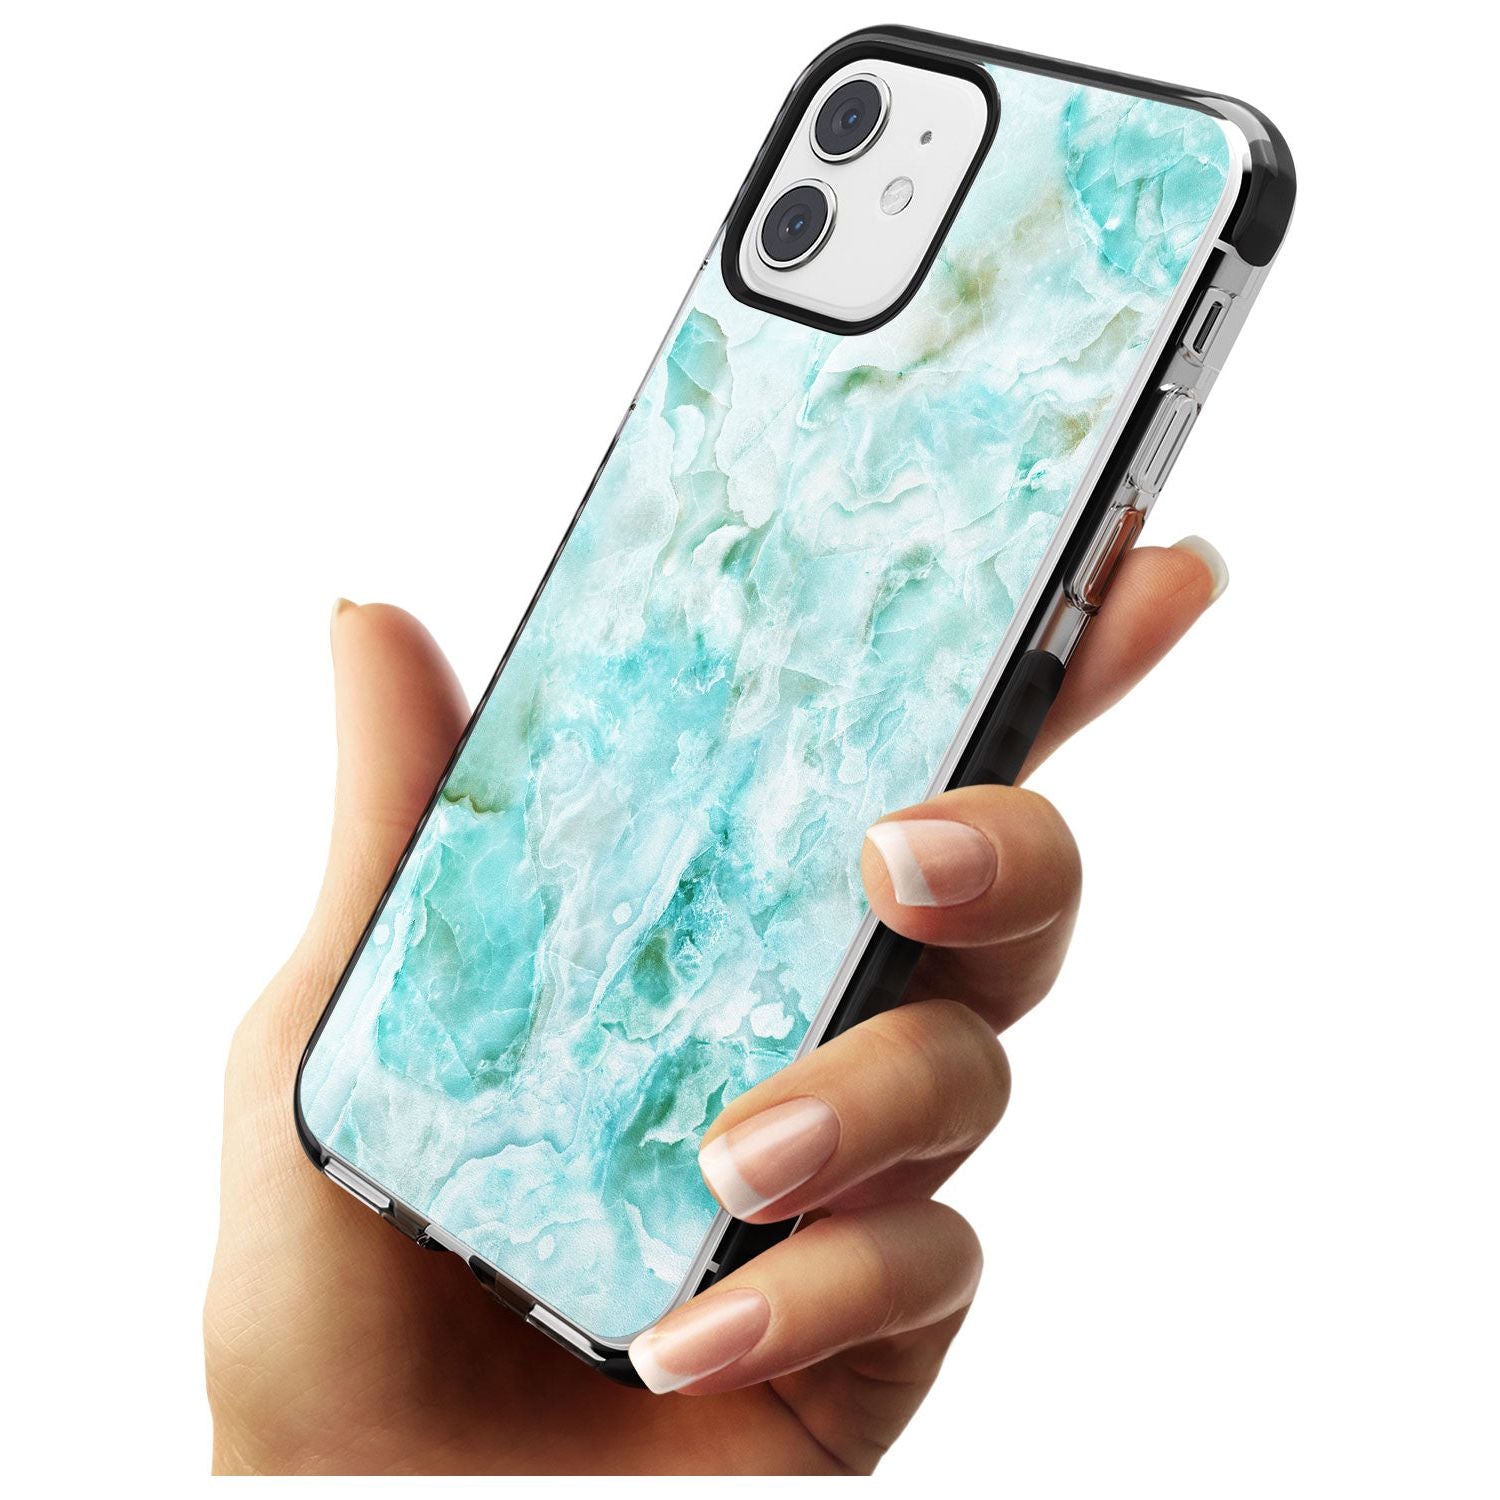 Turquoise Aqua Onyx Marble Pink Fade Impact Phone Case for iPhone 11 Pro Max